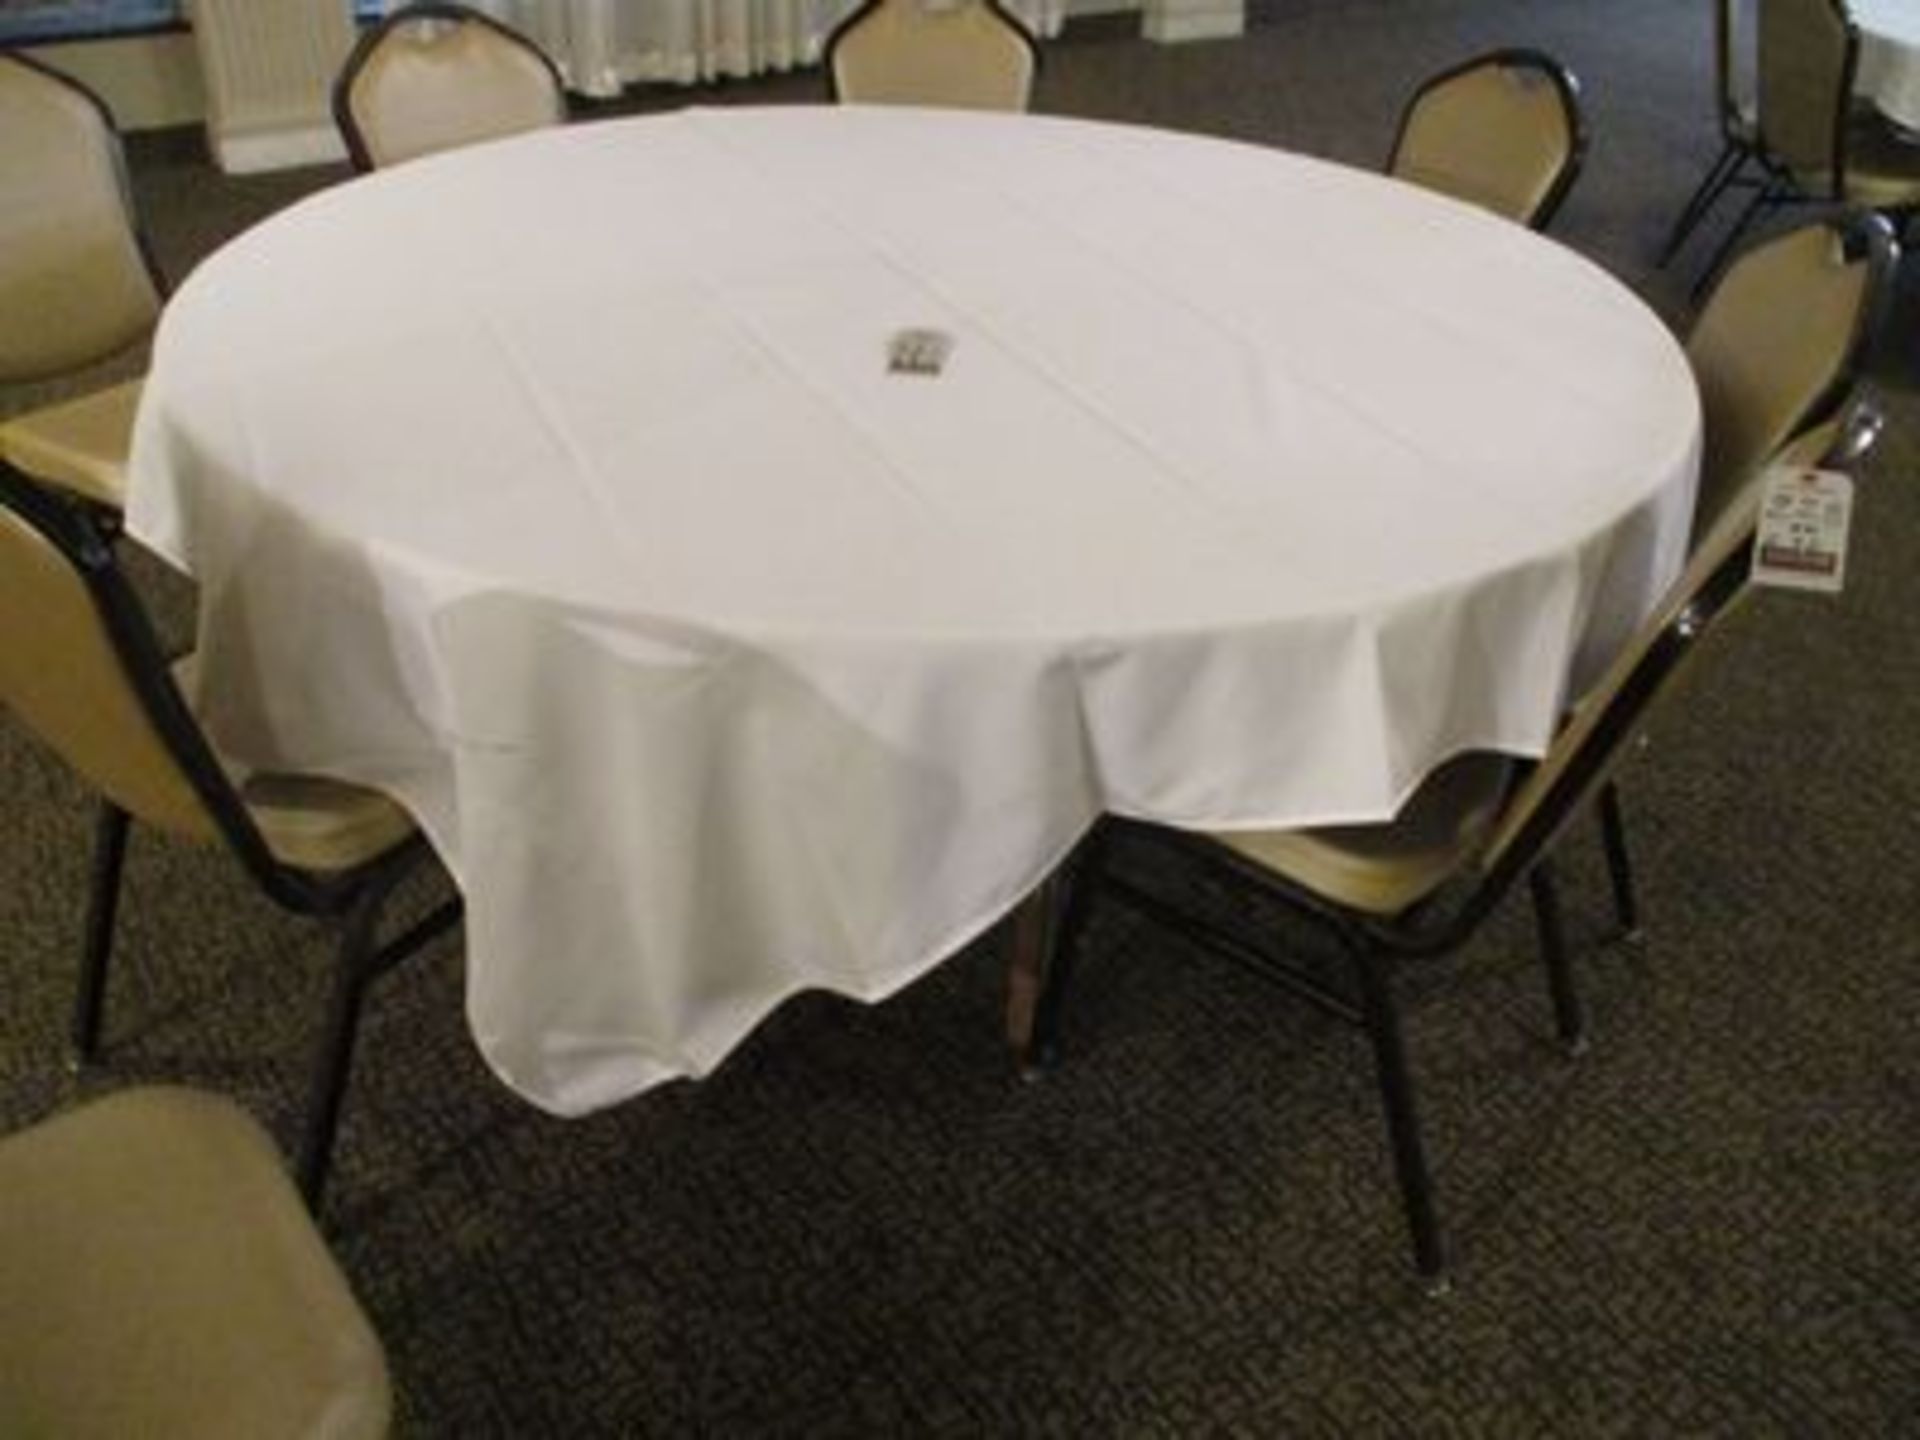 6' DIA. WOOD BANQUET TABLE W/ LINEN - Image 2 of 2